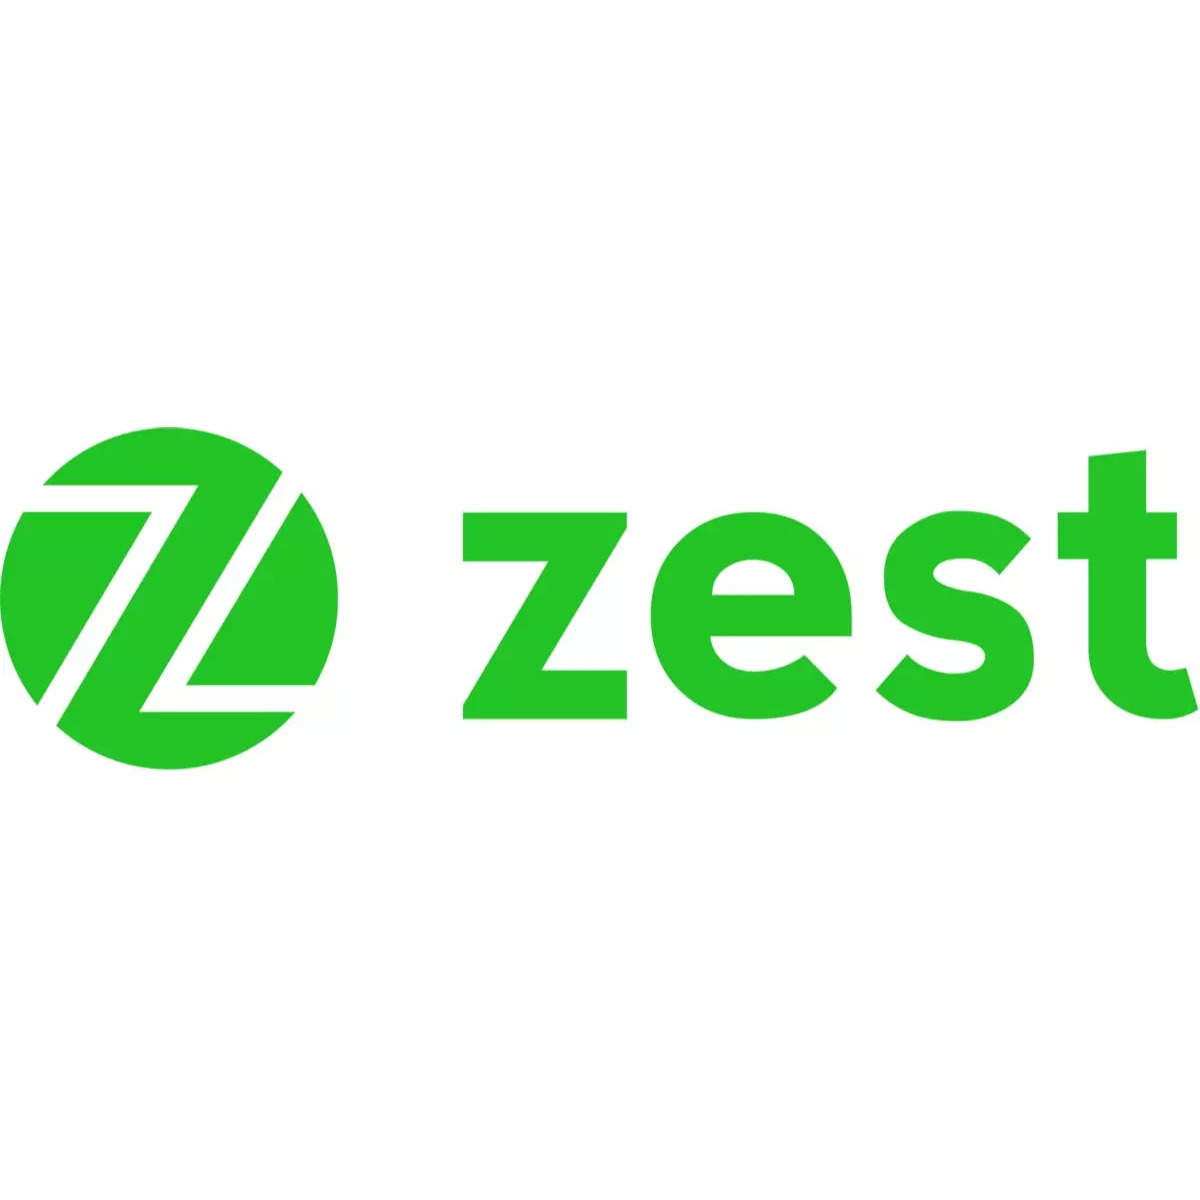 IqZest.com is for sale